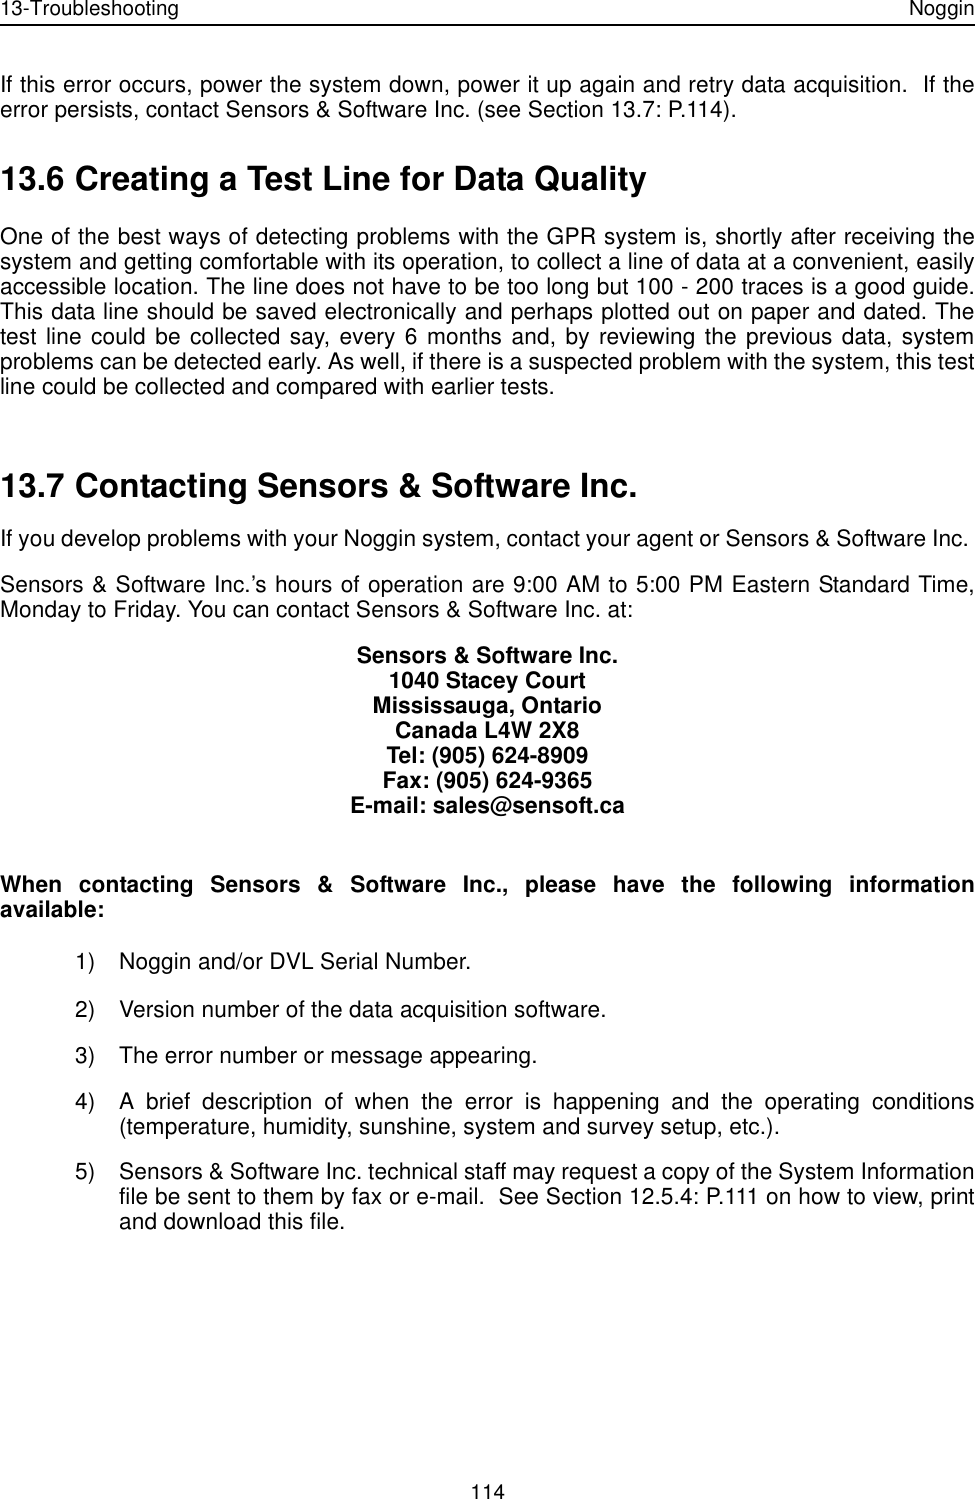 13-Troubleshooting Noggin114If this error occurs, power the system down, power it up again and retry data acquisition.  If theerror persists, contact Sensors &amp; Software Inc. (see Section 13.7: P.114).13.6 Creating a Test Line for Data QualityOne of the best ways of detecting problems with the GPR system is, shortly after receiving thesystem and getting comfortable with its operation, to collect a line of data at a convenient, easilyaccessible location. The line does not have to be too long but 100 - 200 traces is a good guide.This data line should be saved electronically and perhaps plotted out on paper and dated. Thetest line could be collected say, every 6 months and, by reviewing the previous data, systemproblems can be detected early. As well, if there is a suspected problem with the system, this testline could be collected and compared with earlier tests. 13.7 Contacting Sensors &amp; Software Inc.If you develop problems with your Noggin system, contact your agent or Sensors &amp; Software Inc. Sensors &amp; Software Inc.’s hours of operation are 9:00 AM to 5:00 PM Eastern Standard Time,Monday to Friday. You can contact Sensors &amp; Software Inc. at:Sensors &amp; Software Inc.1040 Stacey CourtMississauga, OntarioCanada L4W 2X8Tel: (905) 624-8909Fax: (905) 624-9365E-mail: sales@sensoft.caWhen contacting Sensors &amp; Software Inc., please have the following informationavailable:1) Noggin and/or DVL Serial Number.2) Version number of the data acquisition software.3) The error number or message appearing.4) A brief description of when the error is happening and the operating conditions(temperature, humidity, sunshine, system and survey setup, etc.).5) Sensors &amp; Software Inc. technical staff may request a copy of the System Informationfile be sent to them by fax or e-mail.  See Section 12.5.4: P.111 on how to view, printand download this file.